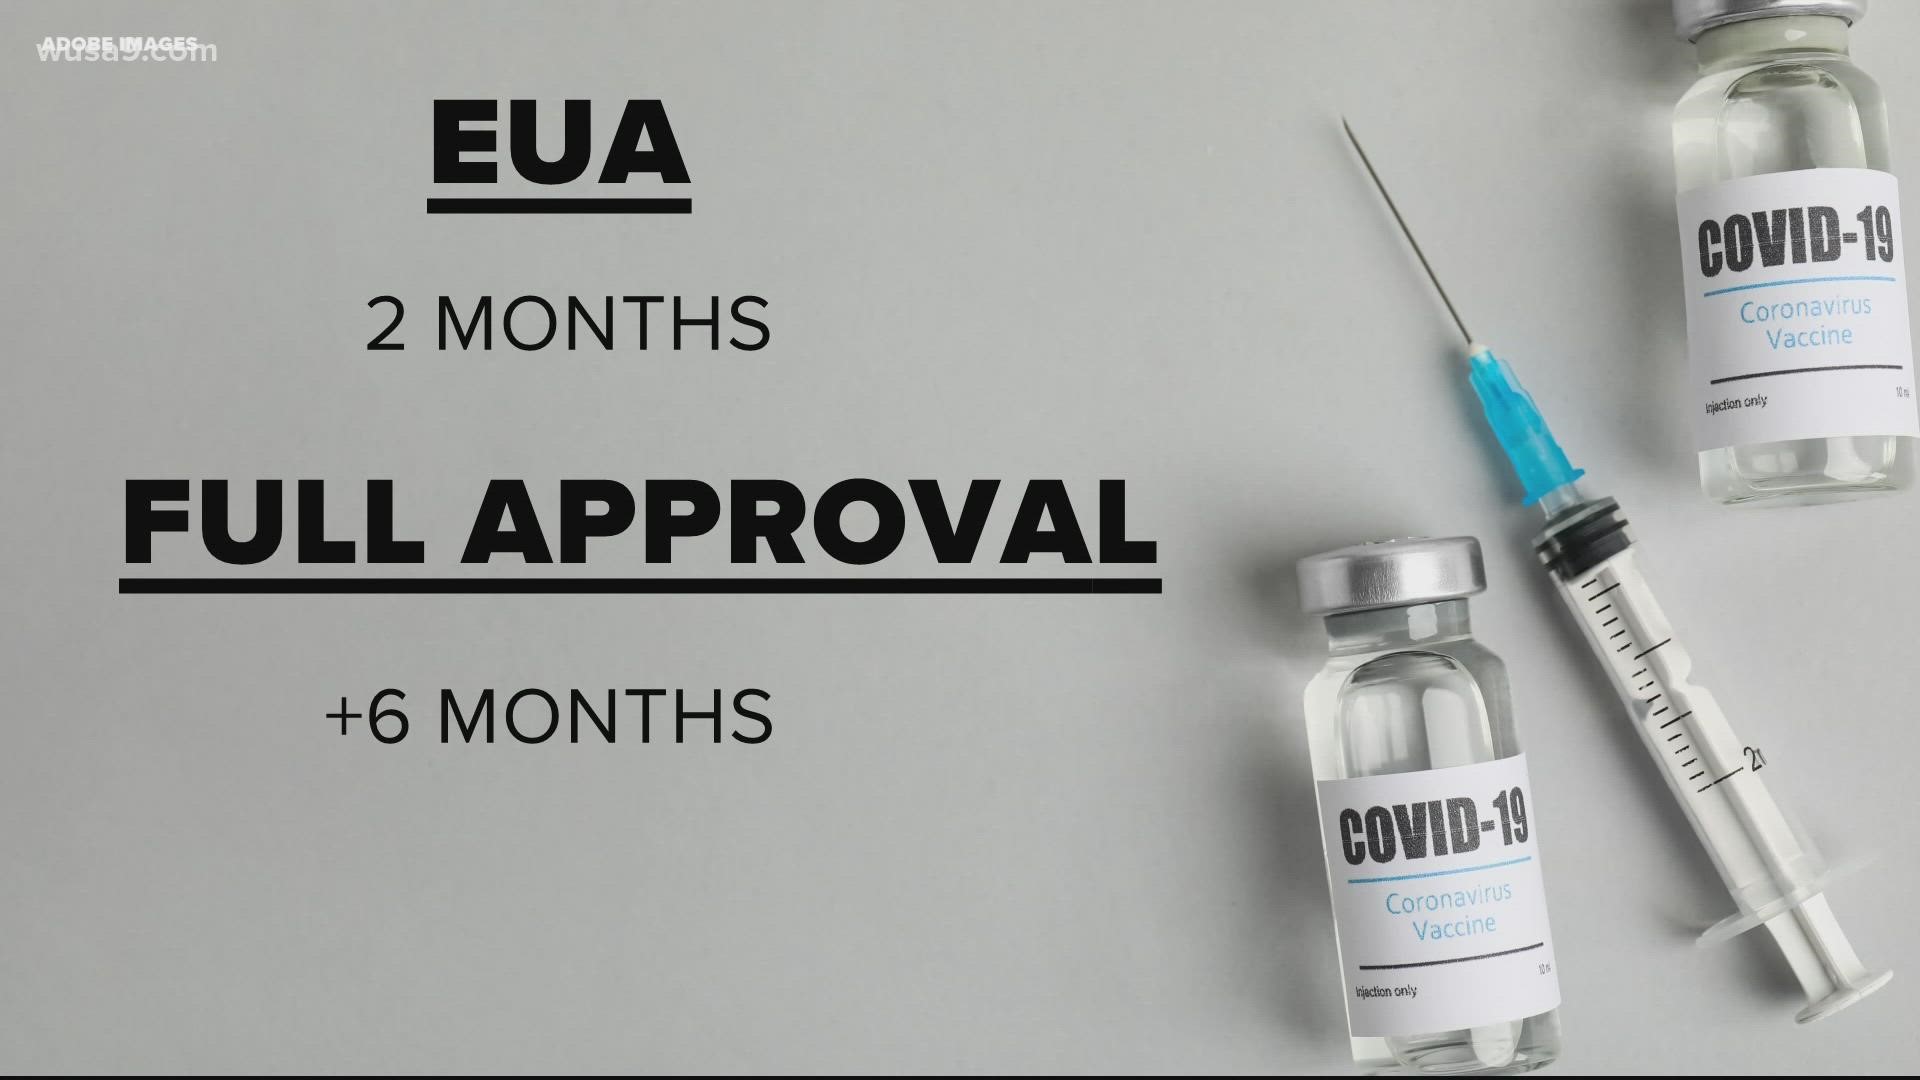 We looked at some of the top questions about the FDA’s approval of the Pfizer vaccine.